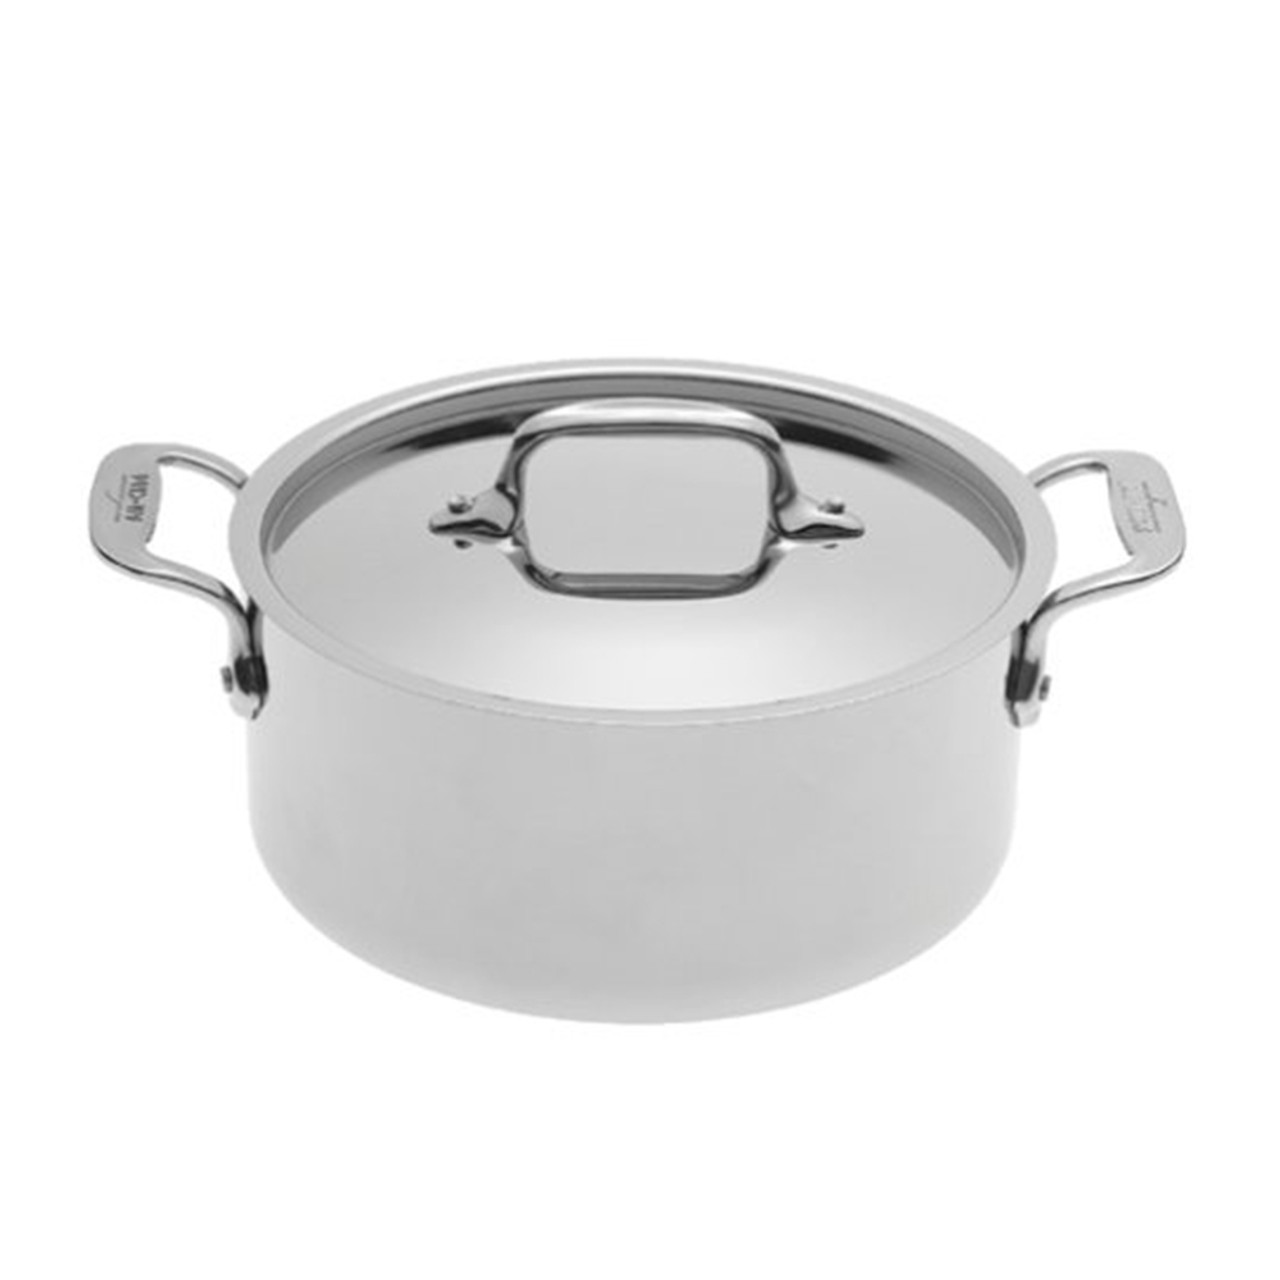 All-Clad d3 Tri-Ply Stainless-Steel 5-Piece Cookware Set.